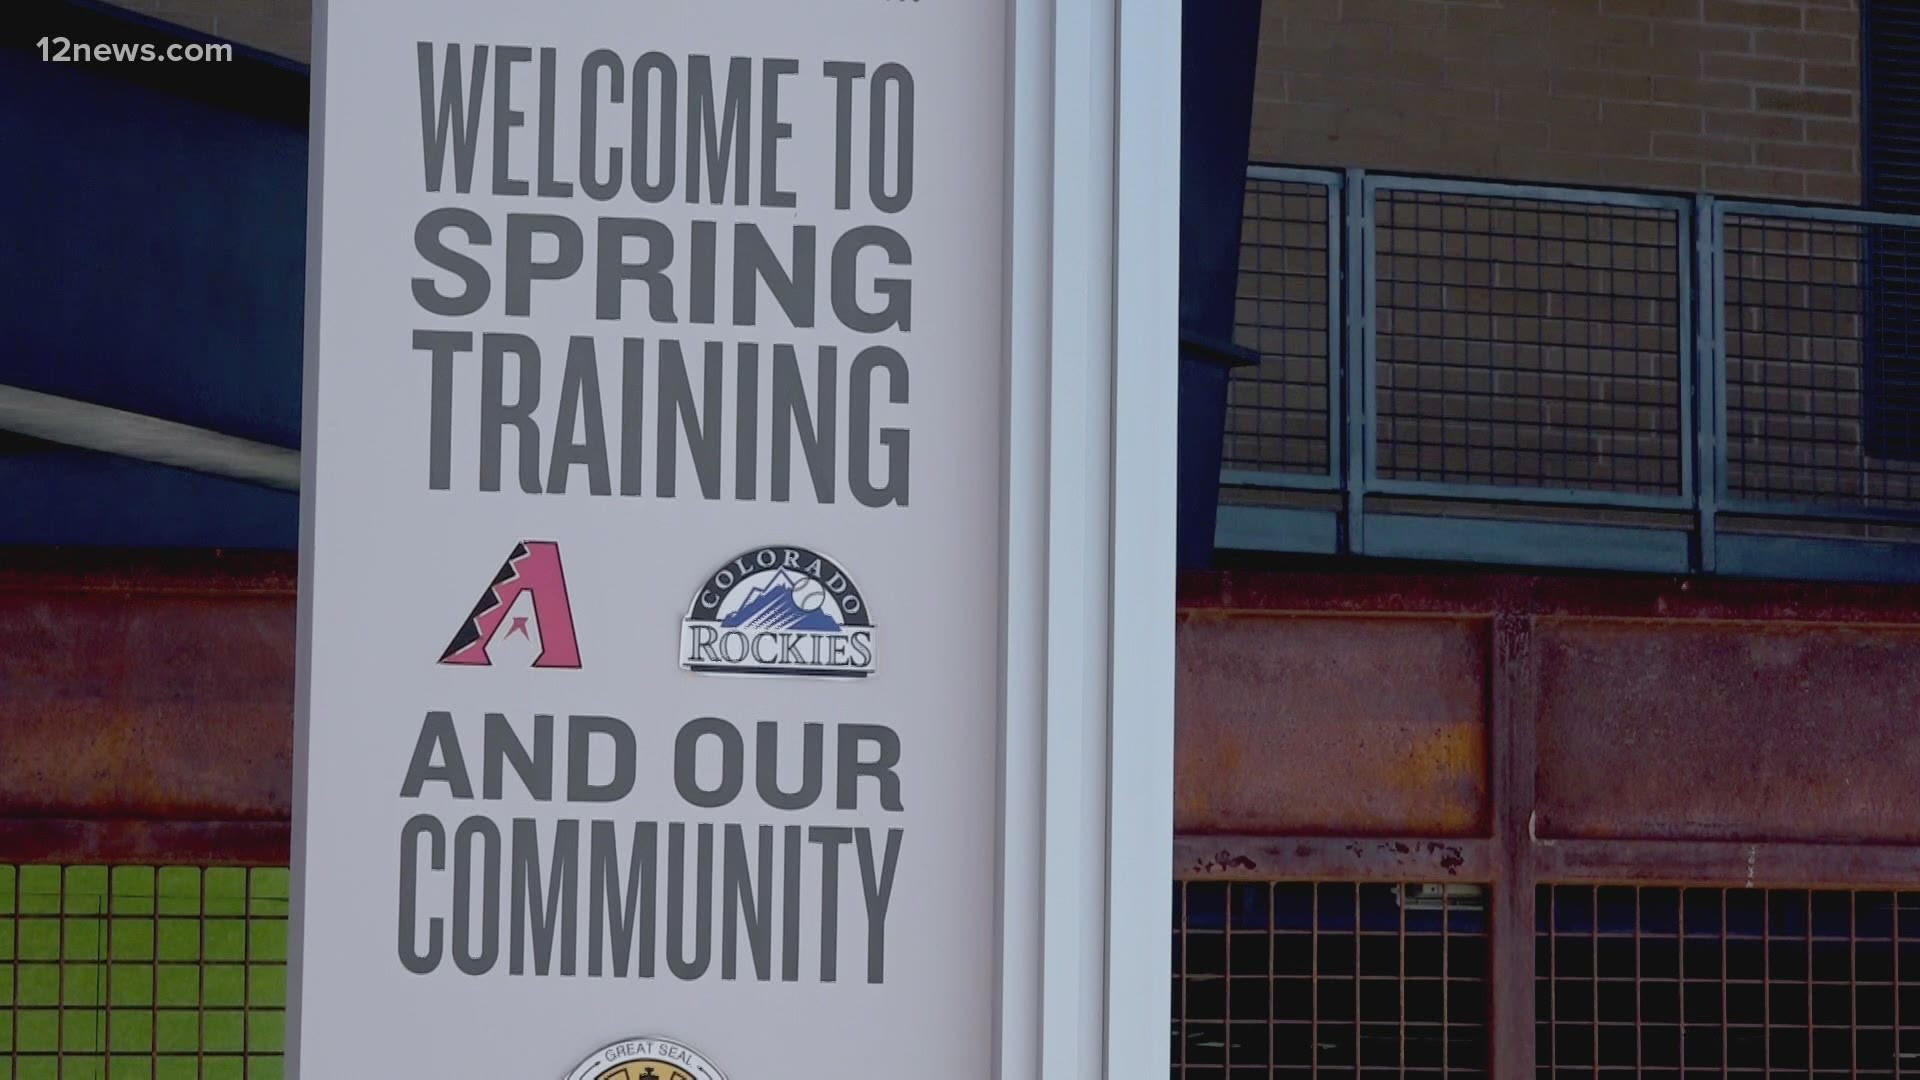 Spring training tickets are set to go on sale Wednesday. Jen Wahl has the details on what you need to know if you're looking to go to a game this year.